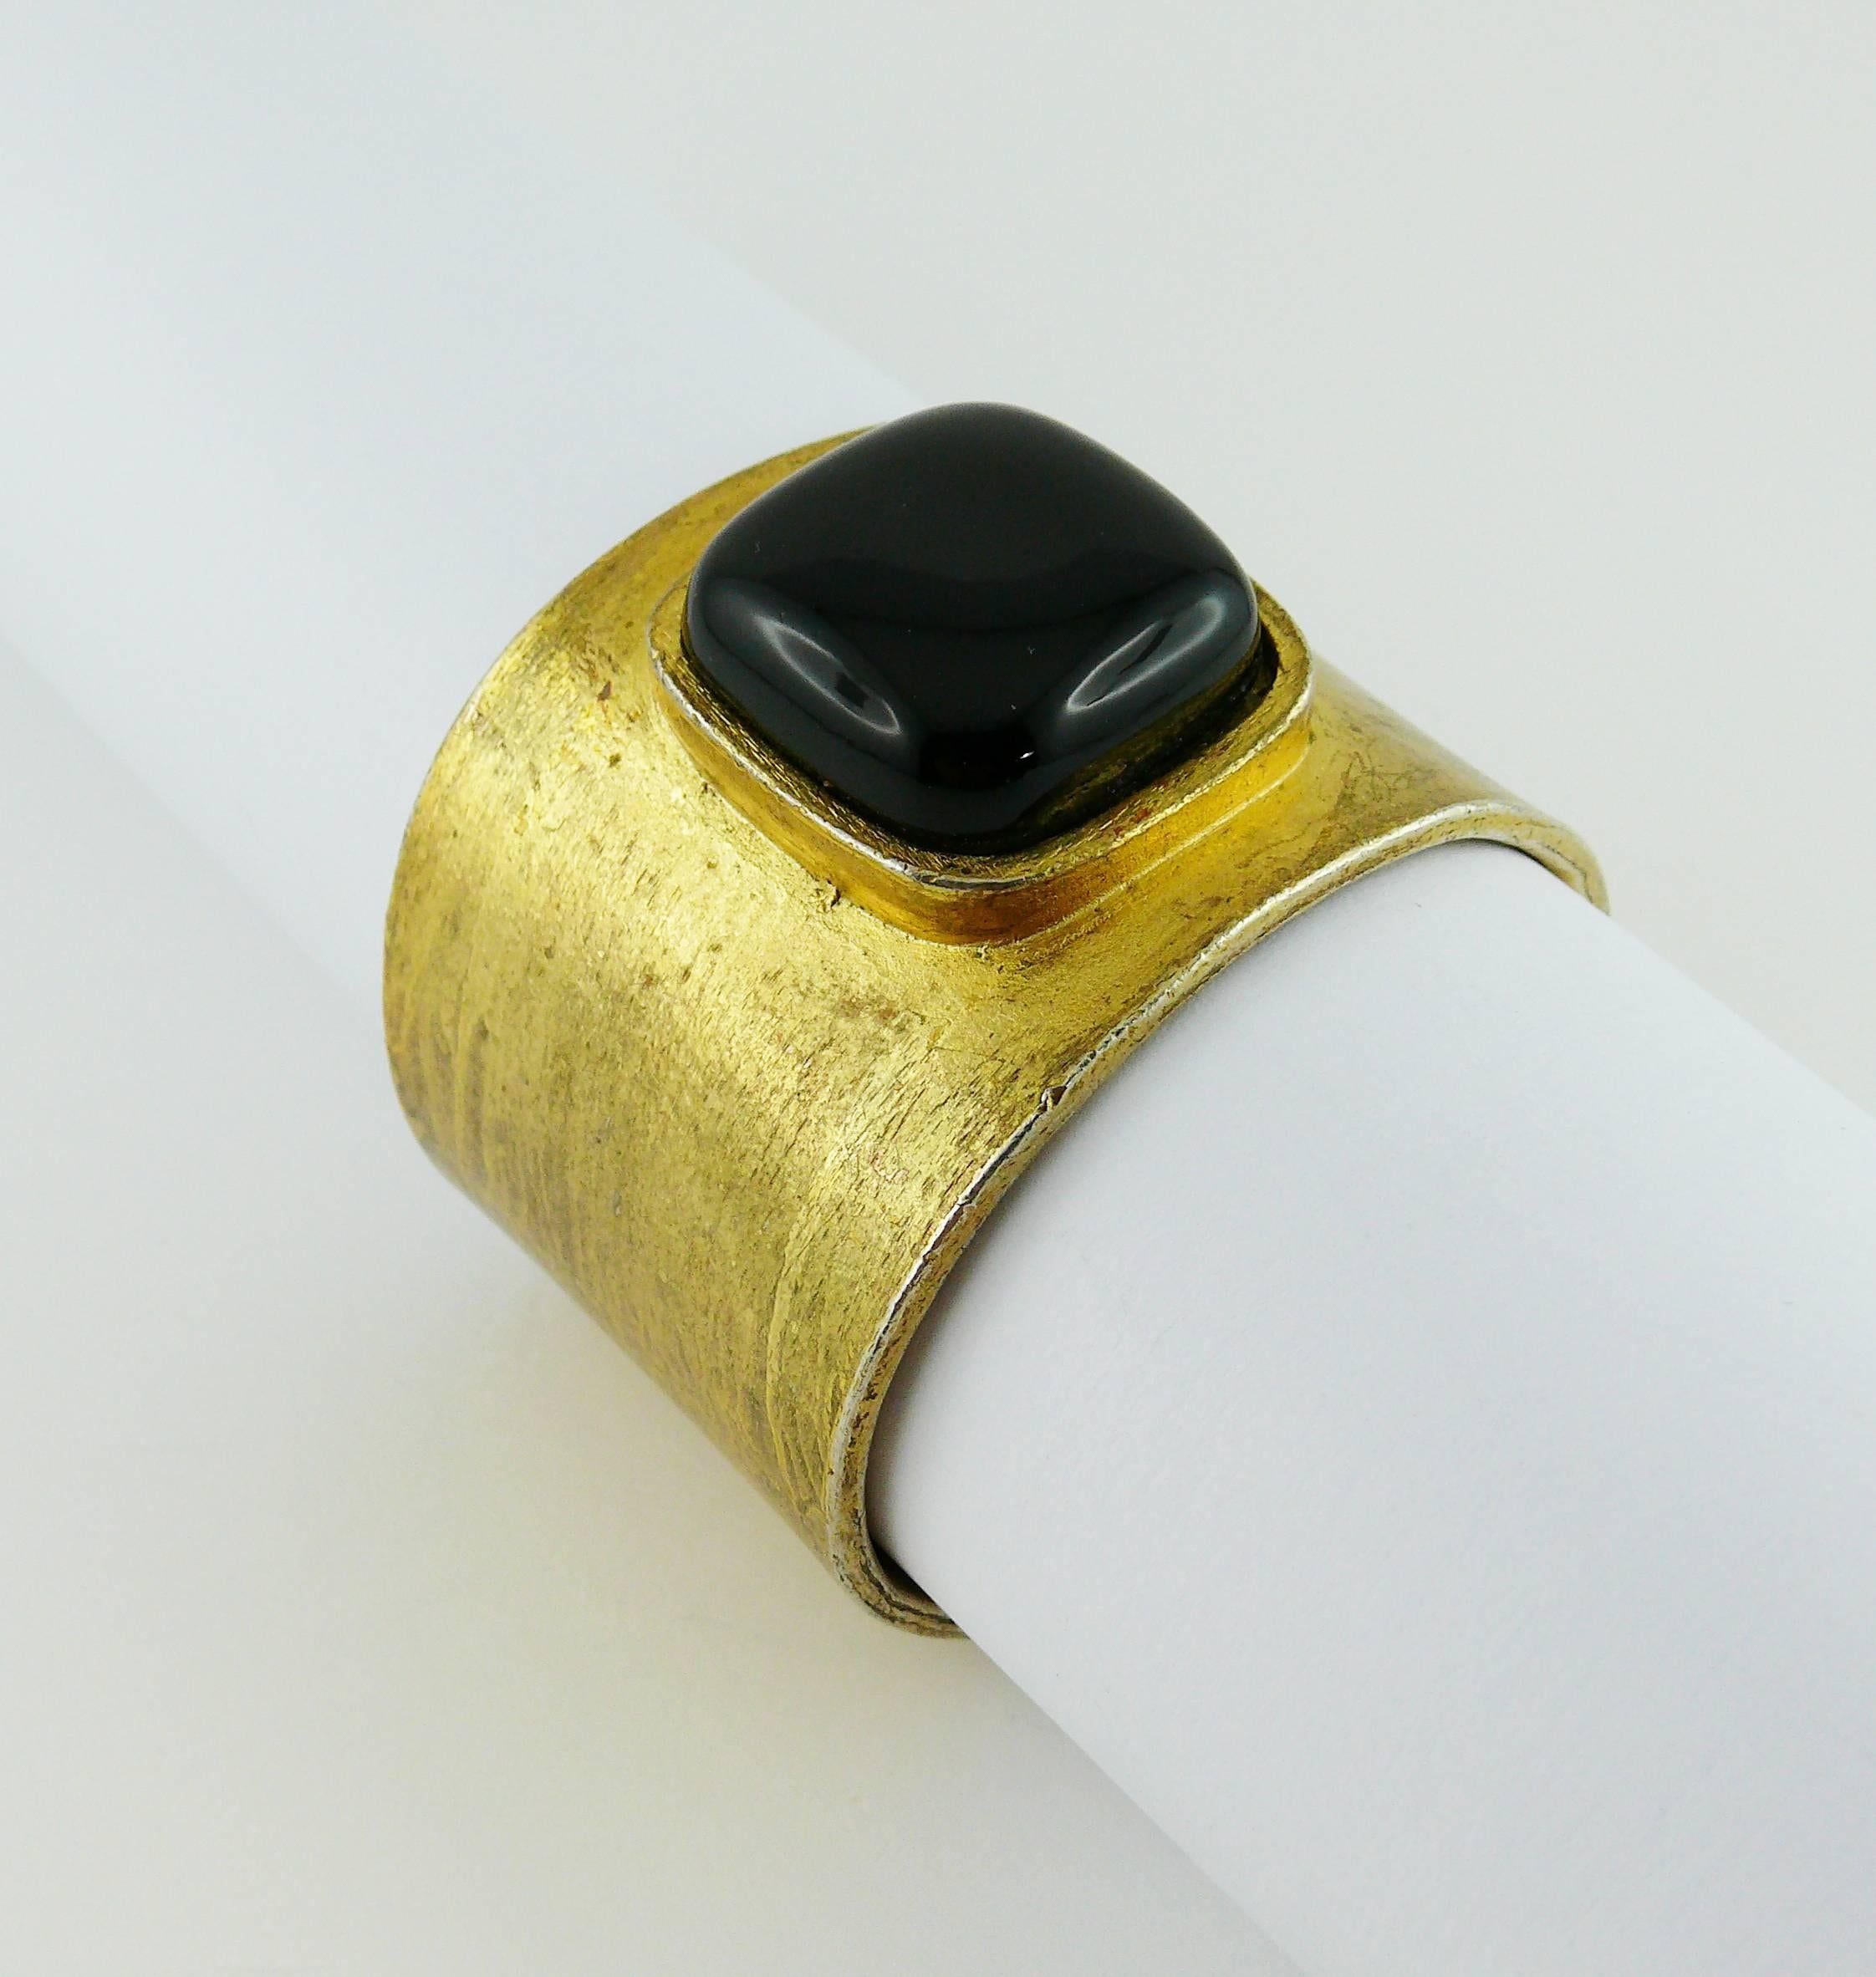 CLAUDE MONTANA vintage 1980s asymetrical Space Age gold toned bracelet featuring a large black glass cabochon.

Marked CLAUDE MONTANA pour CLAIRE DEVE.

Indicative measurements : width approx. 4.20 cm (1.65 inches) / wrist opening approx. 2.80